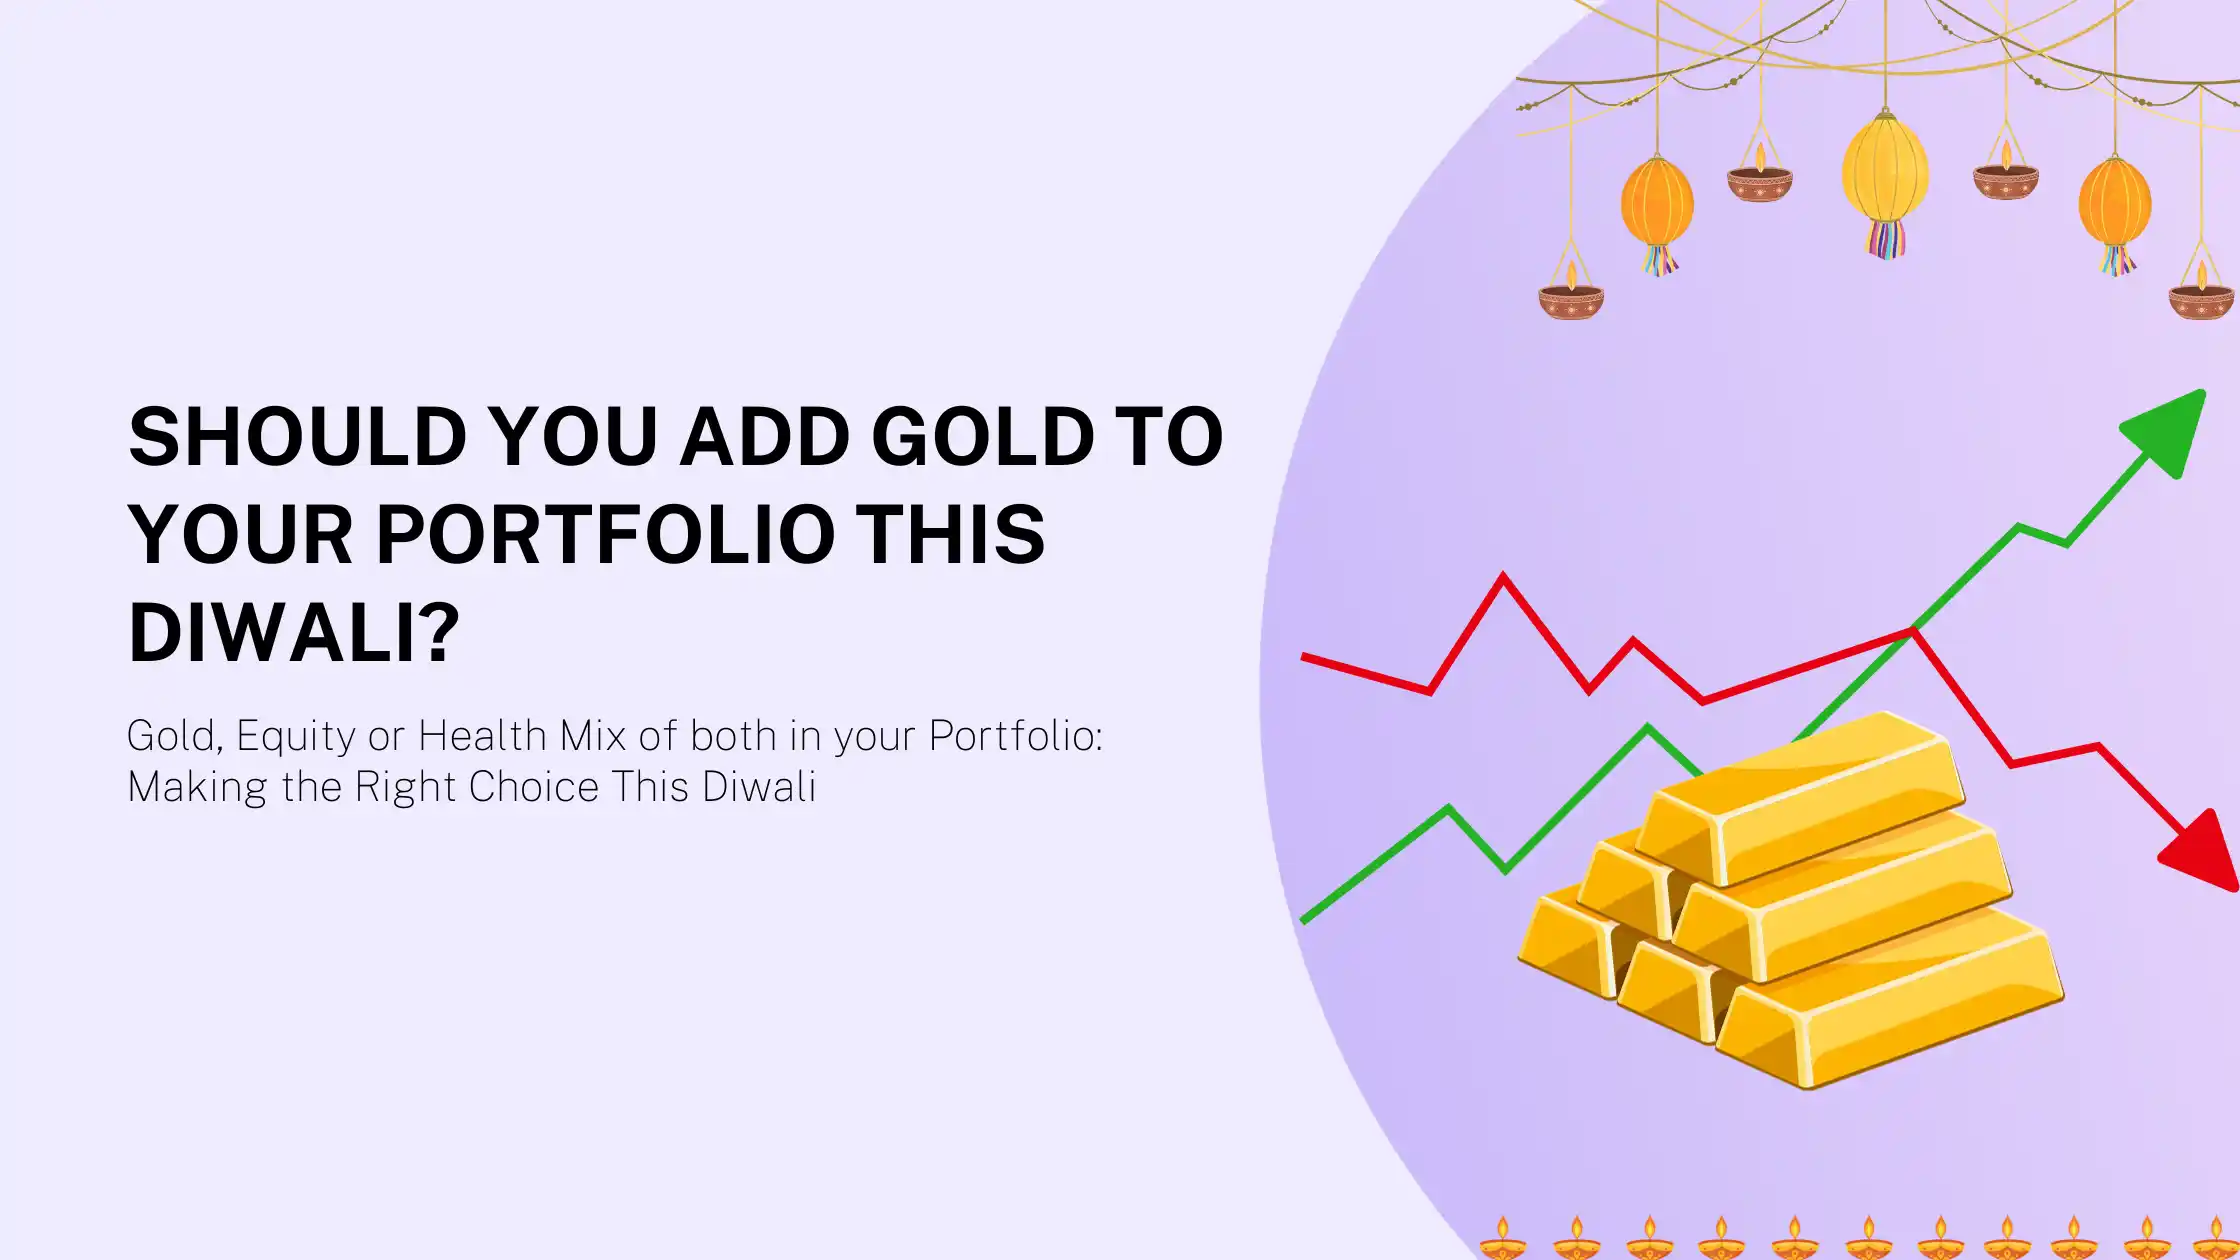 Should You Add Gold To Your Portfolio This Diwali?